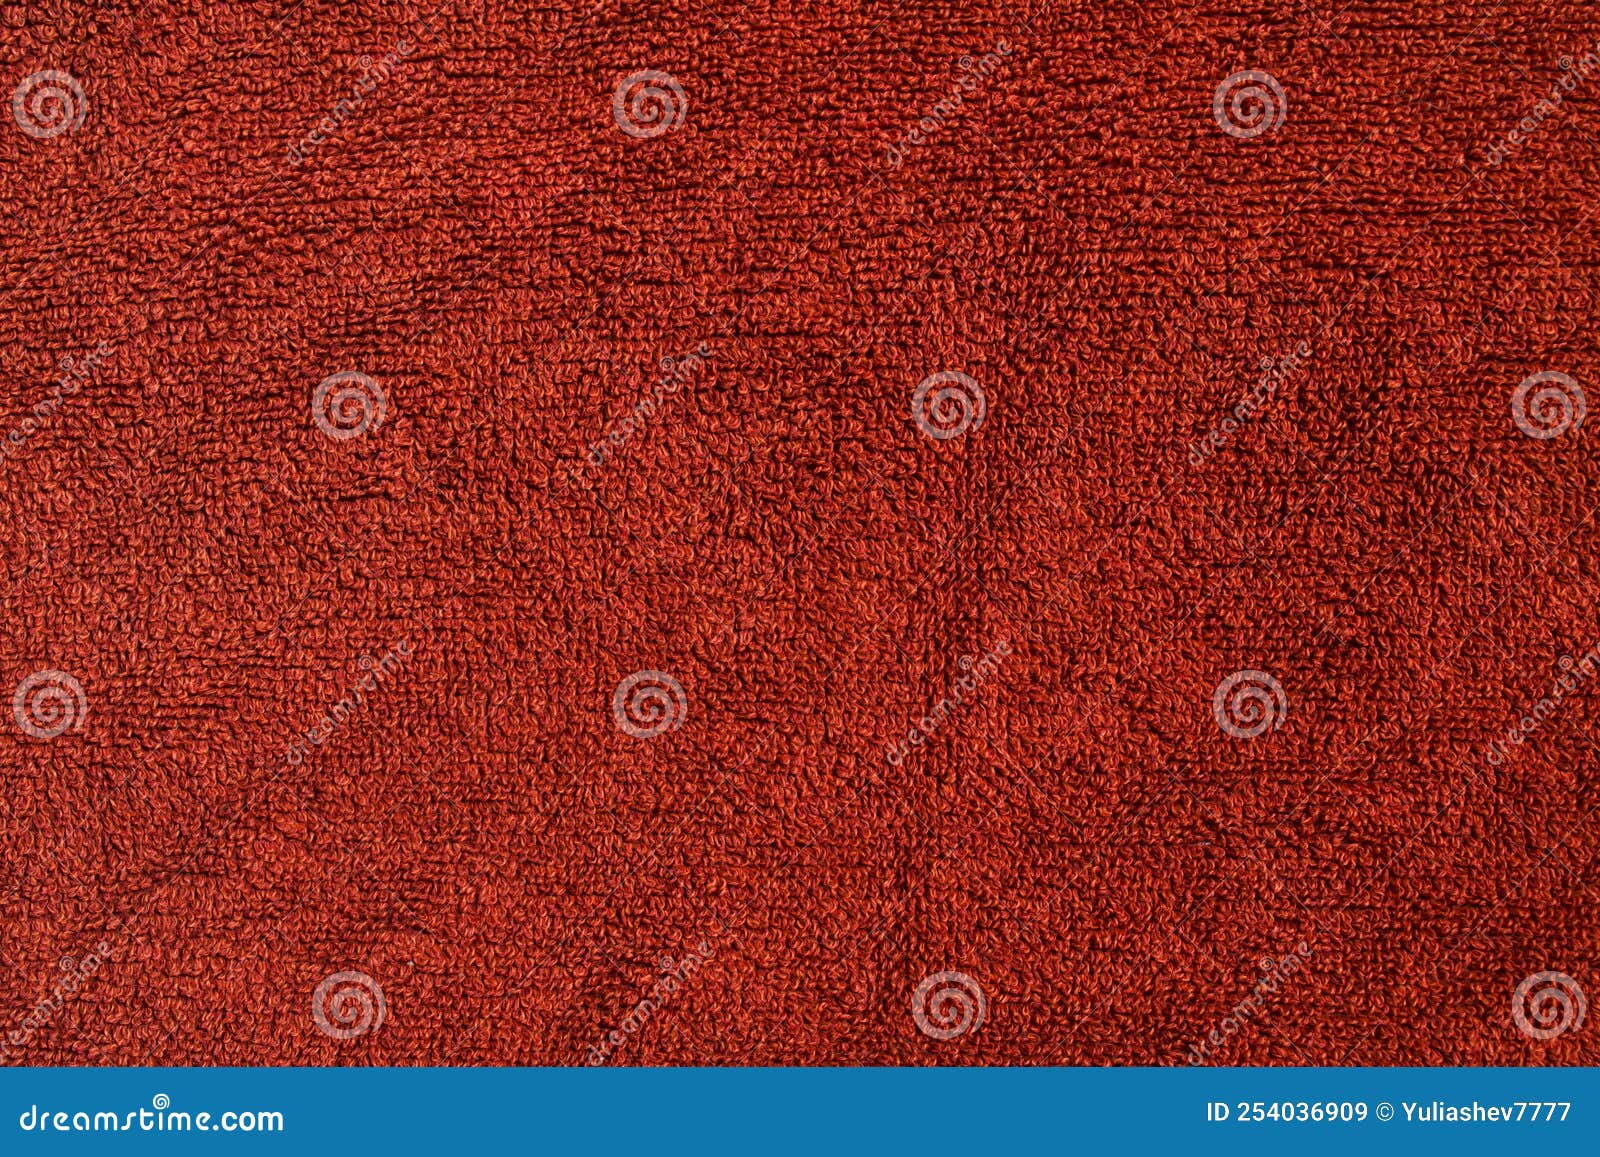 background, texture, red towel, fabric